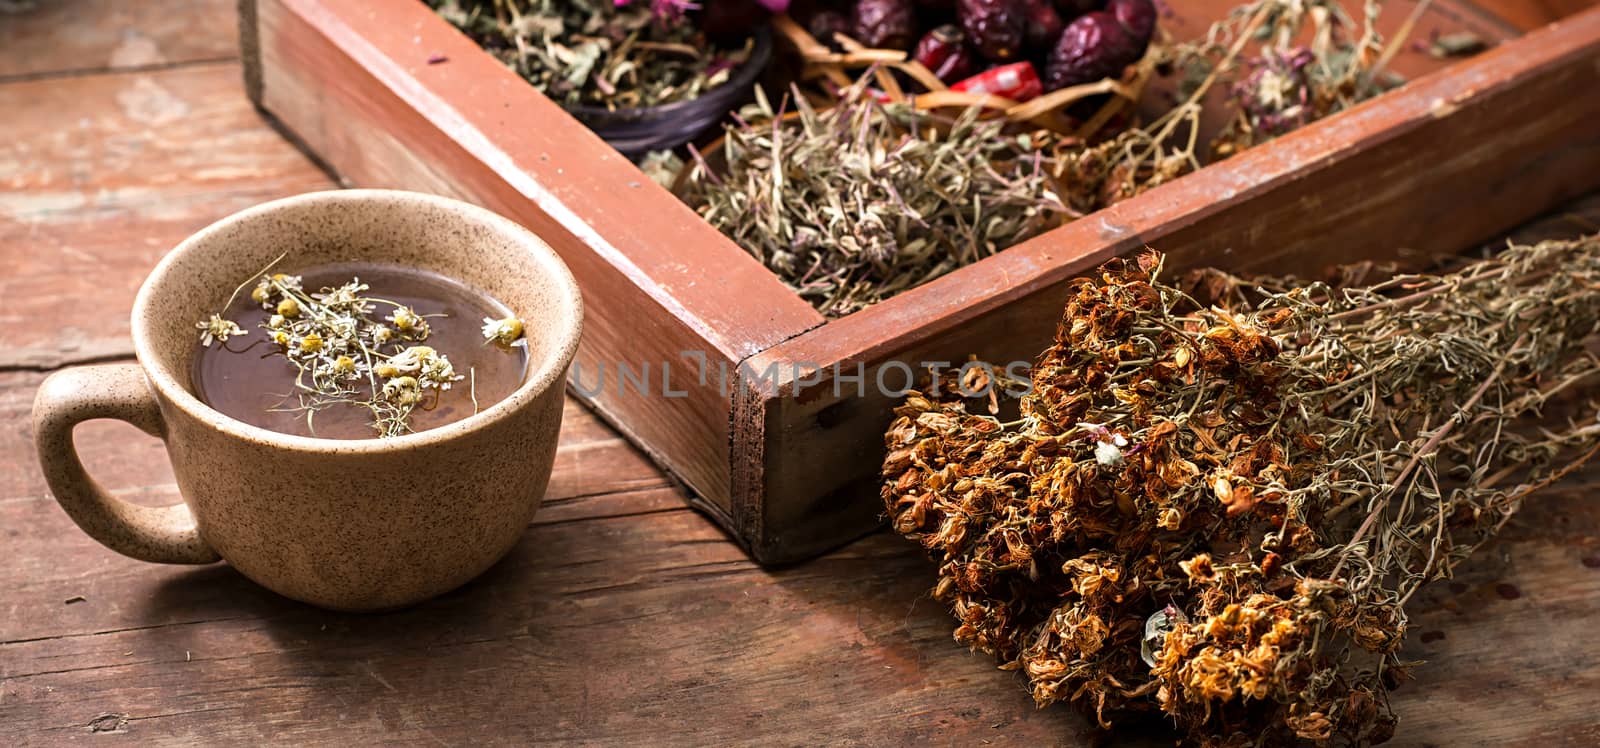 ceramic cup with tea brewed from dried chamomile and medicinal herbs.Selective focus